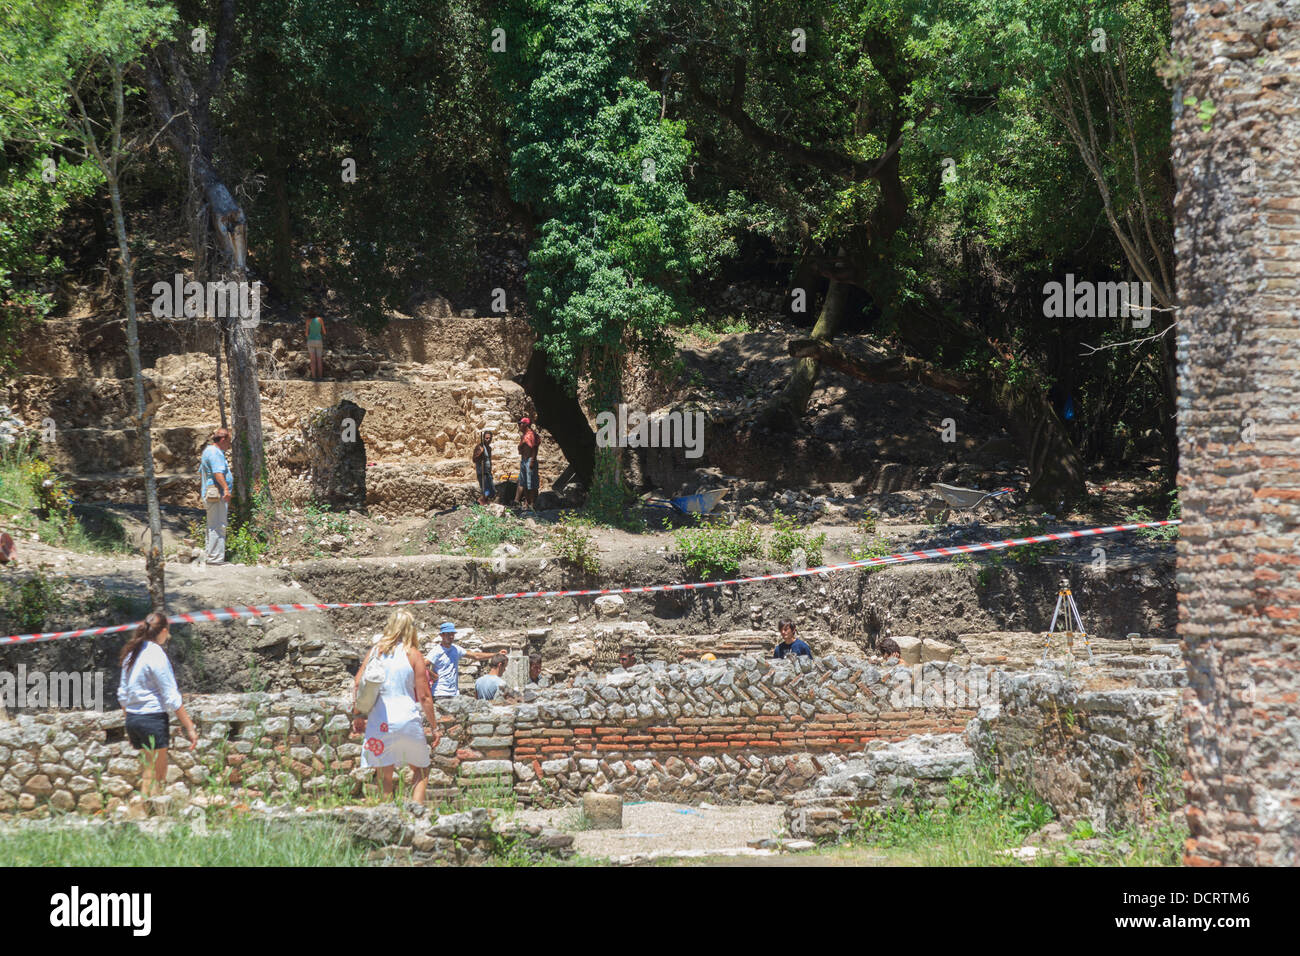 Archaeologists working on the ancient Roman and Greek remains at Butrint Albania Stock Photo